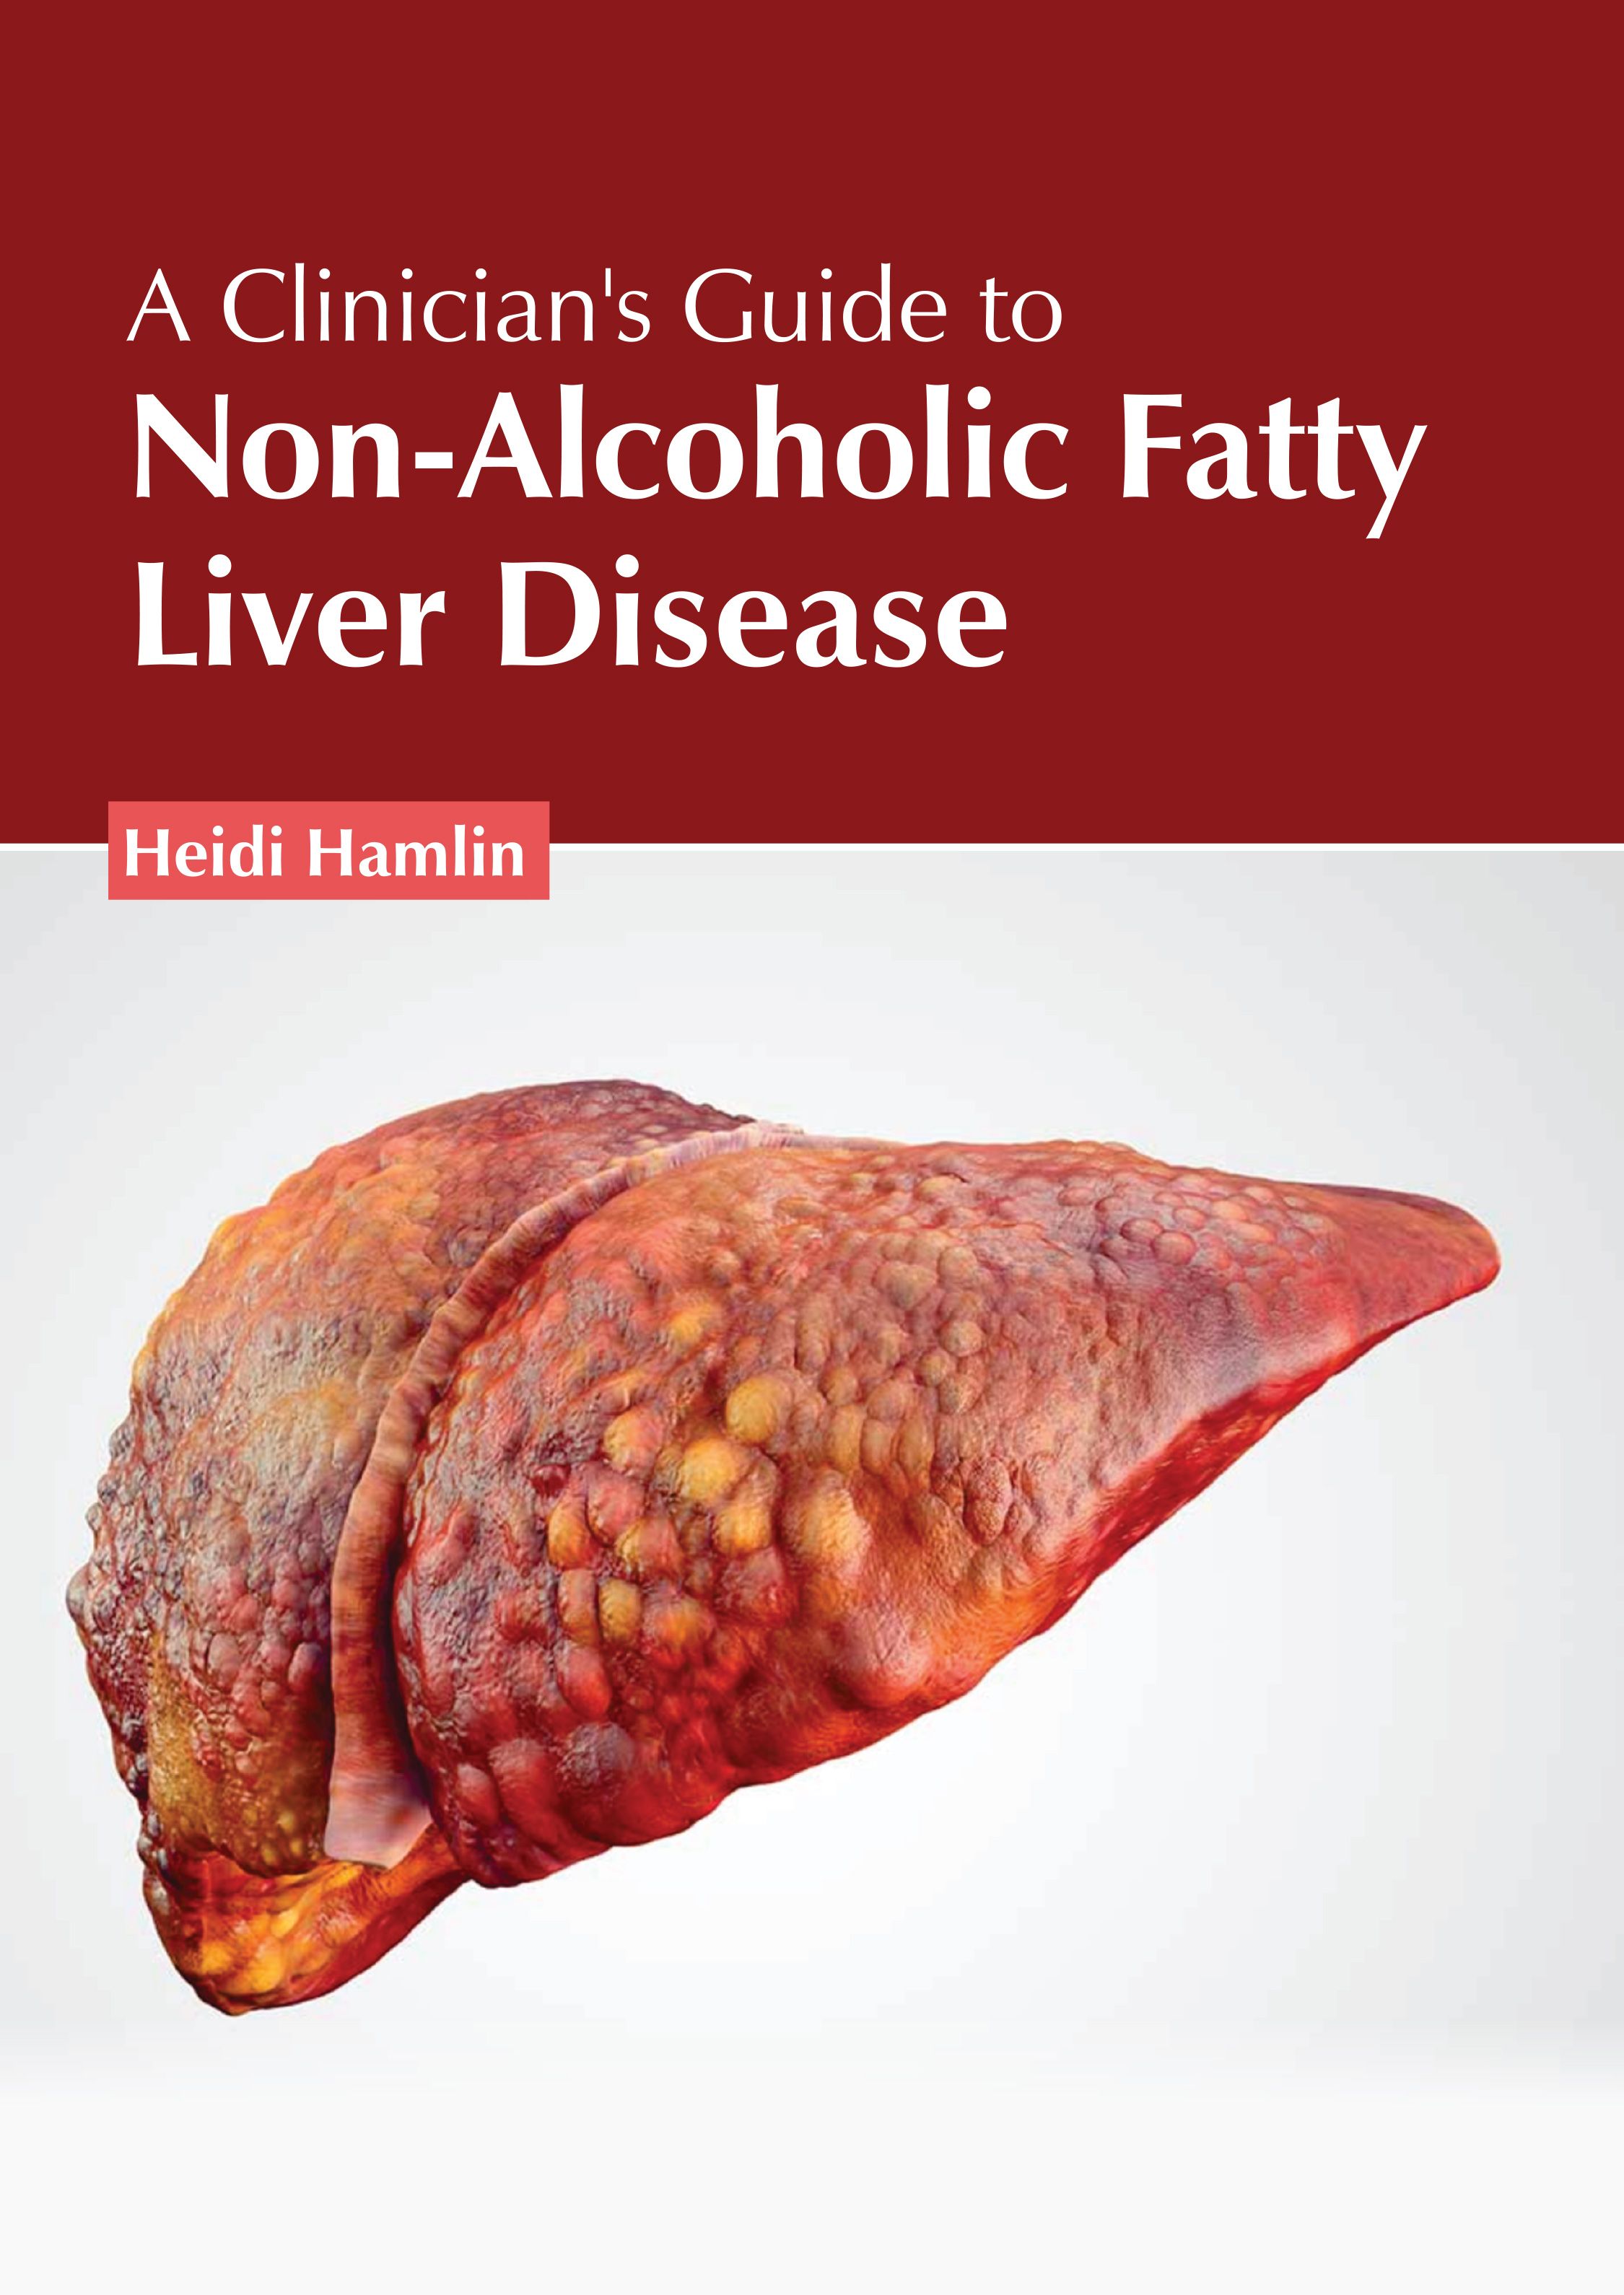 

exclusive-publishers/american-medical-publishers/a-clinician-s-guide-to-non-alcoholic-fatty-liver-disease-9781639275779